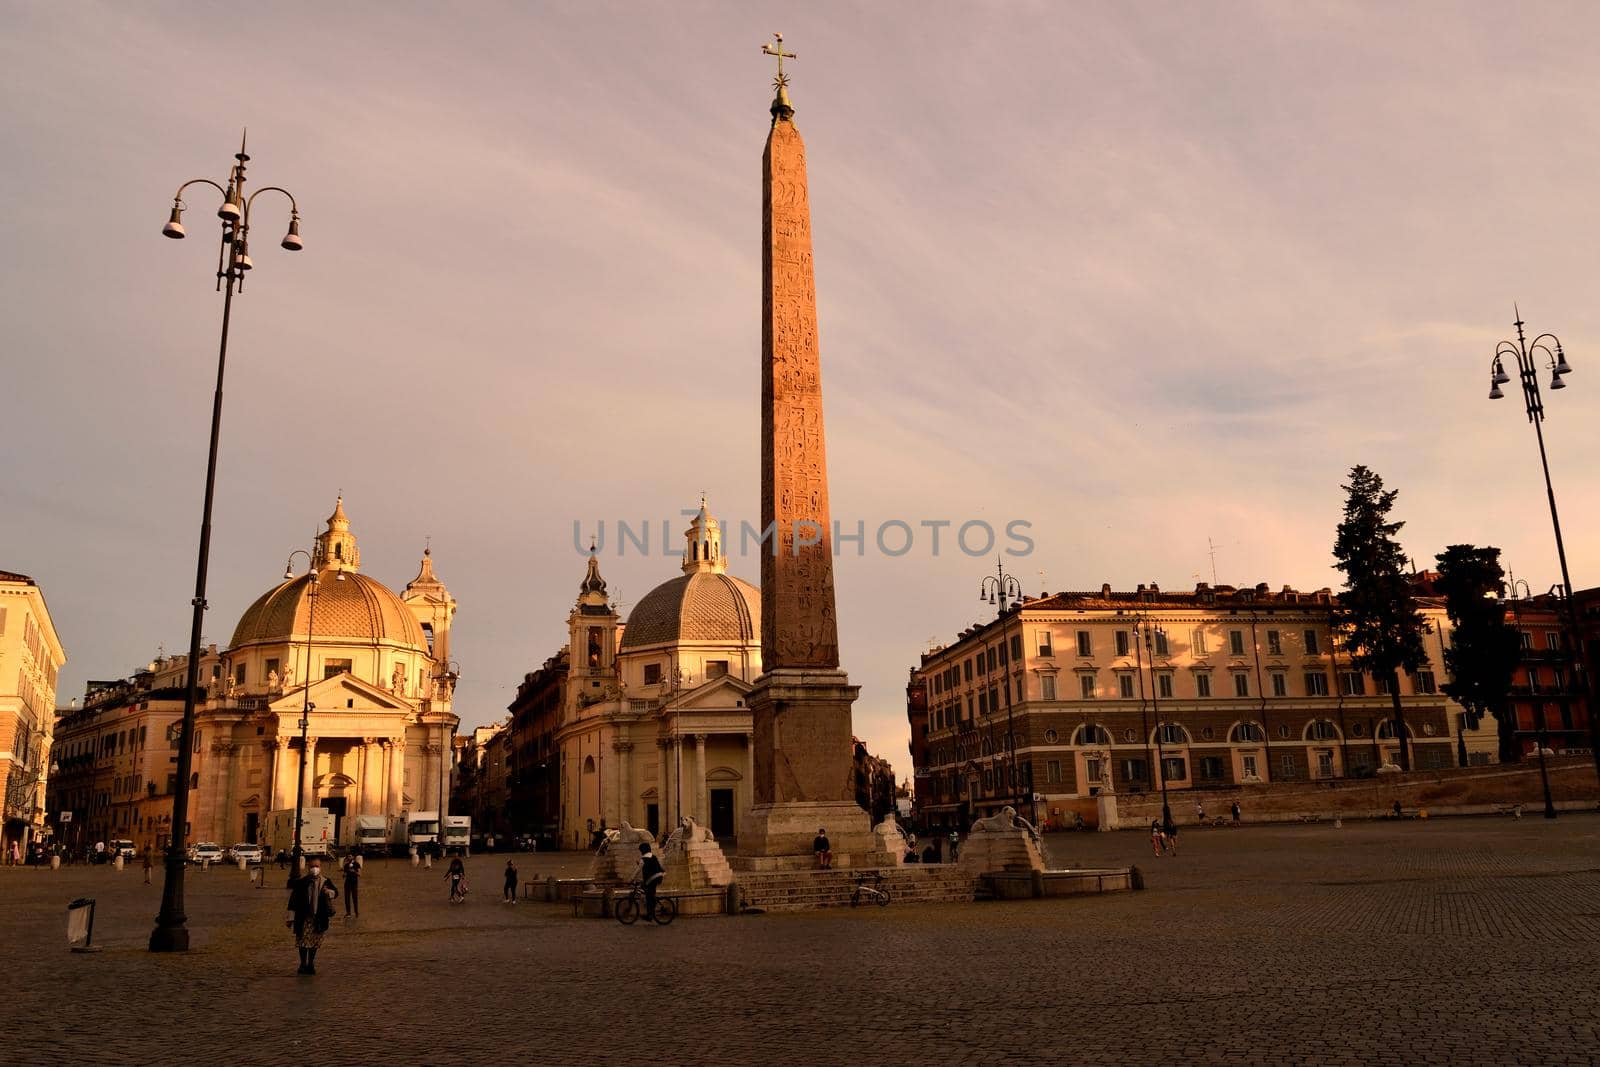 May 8th 2020, Rome, Italy: View of the Piazza del Popolo without tourists due to the phase 2 of lockdown